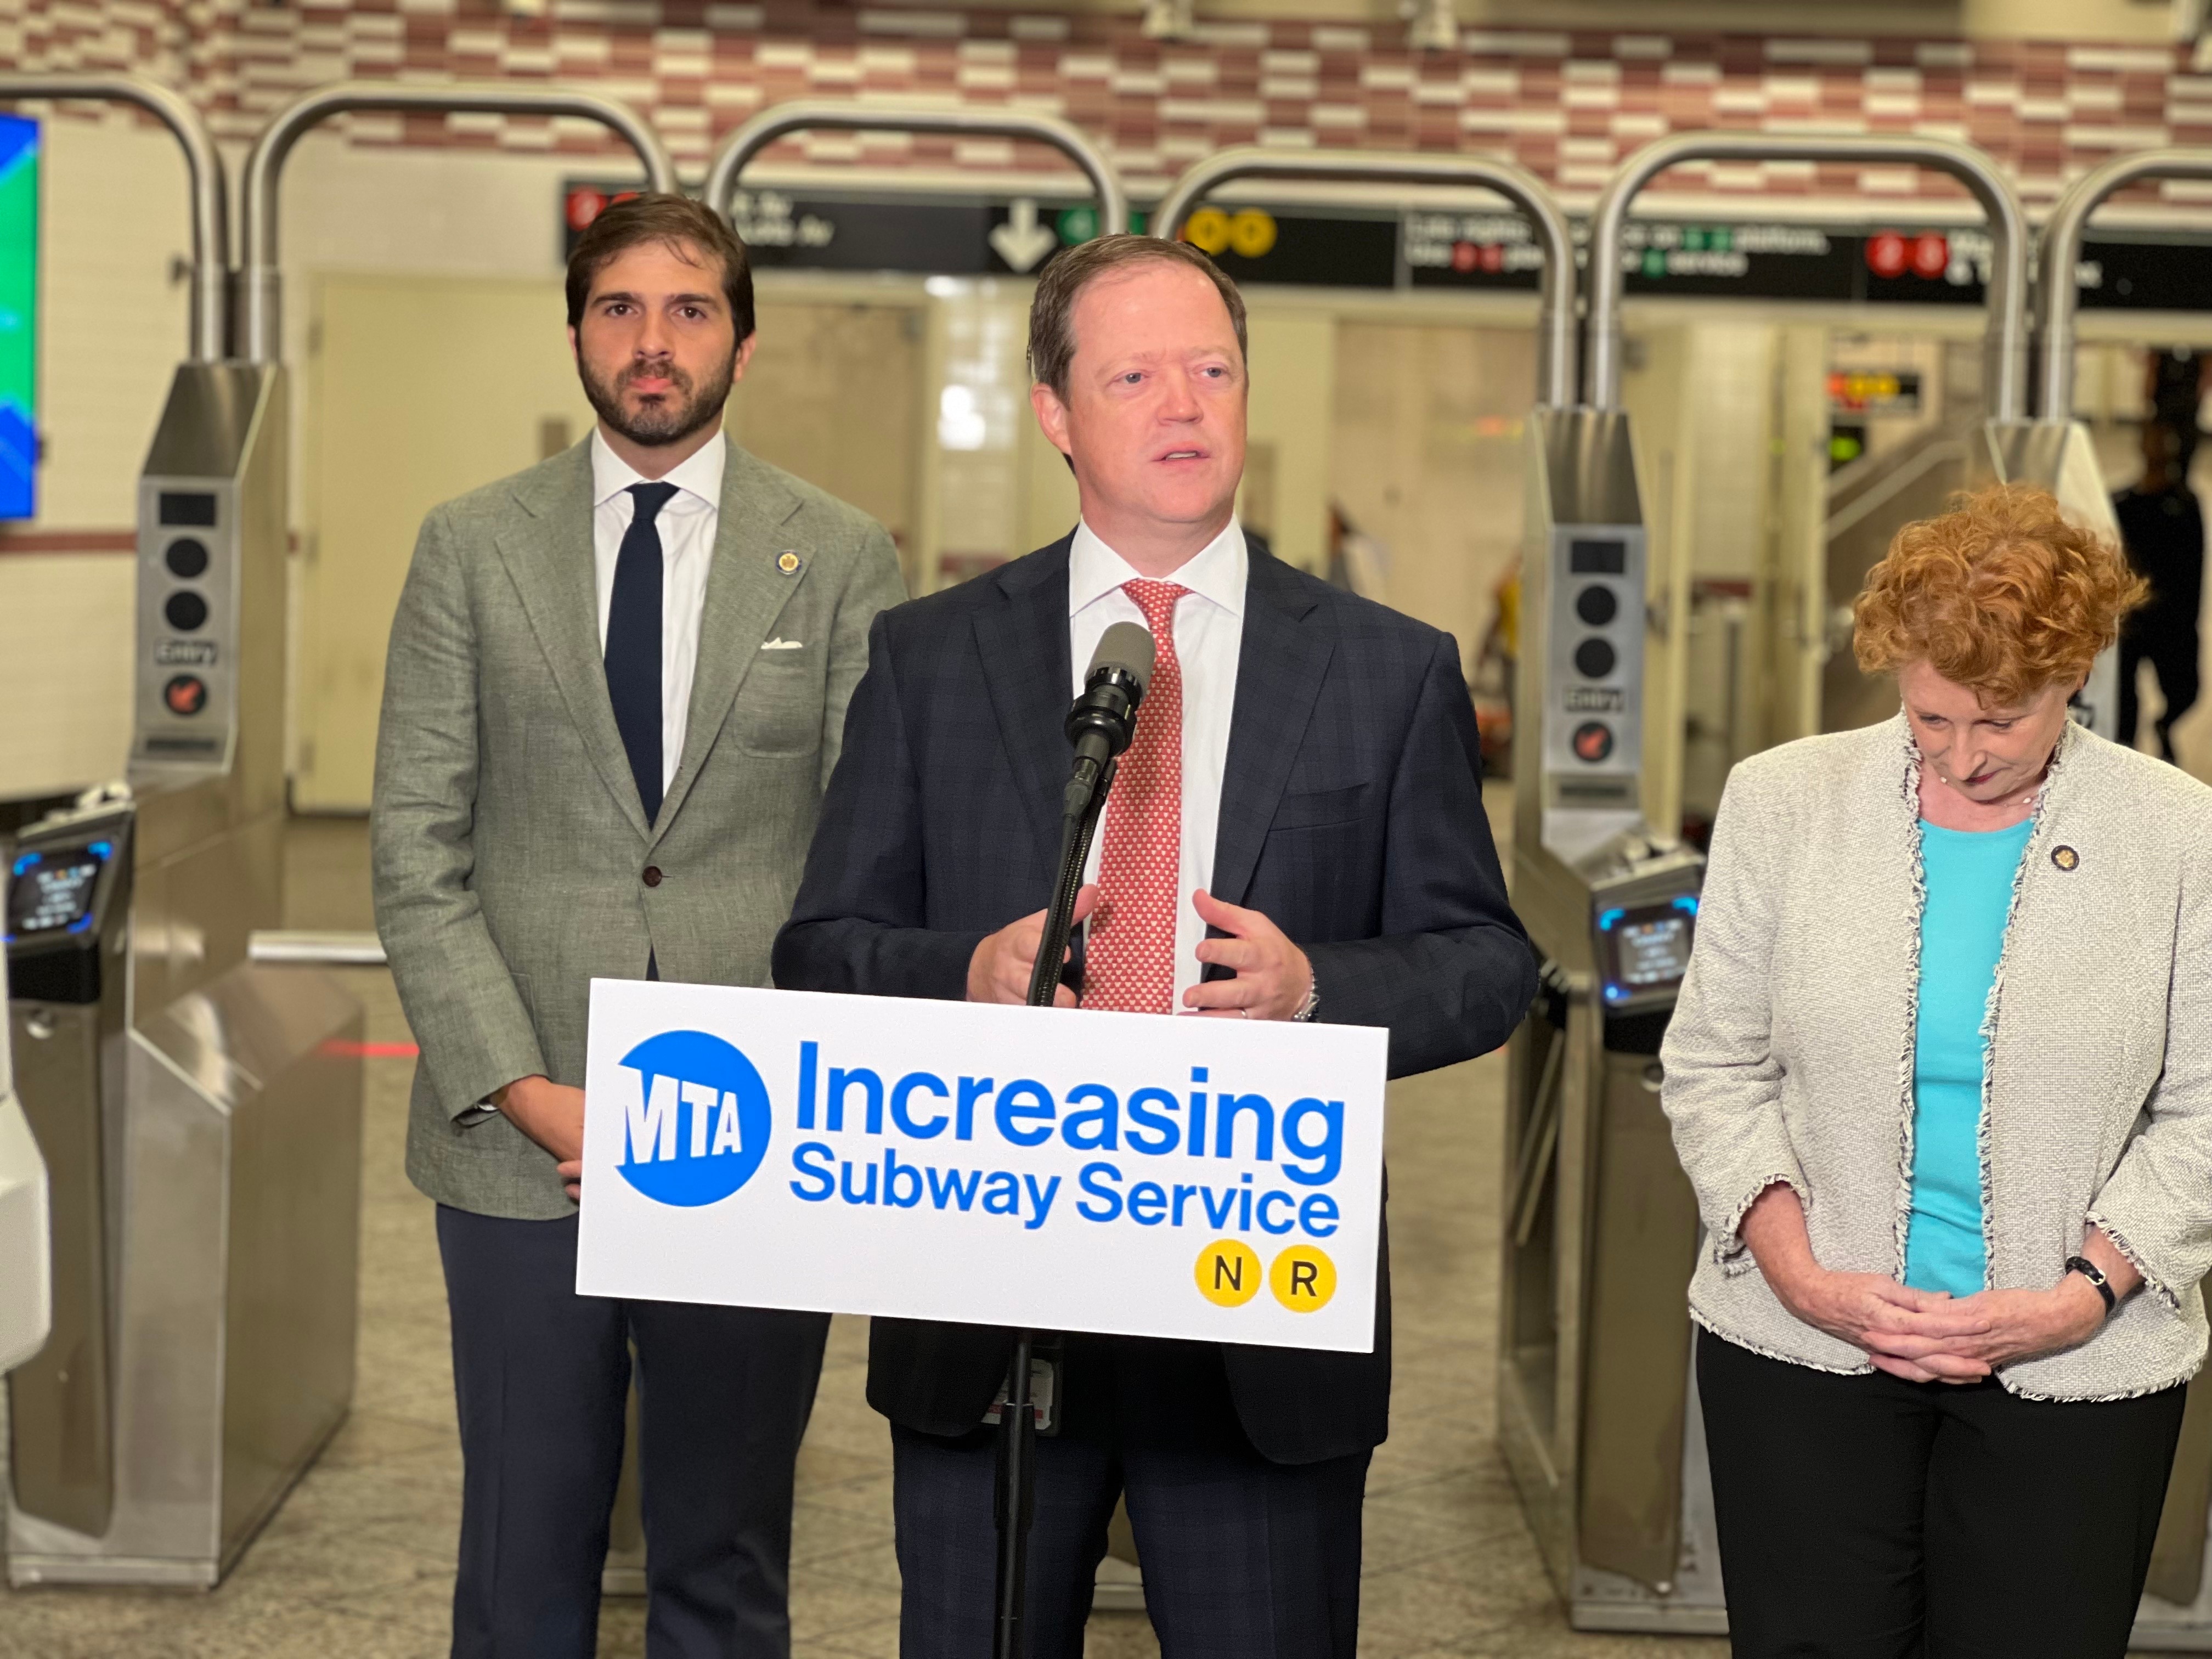 MTA Announces Service Increases on N and R Lines